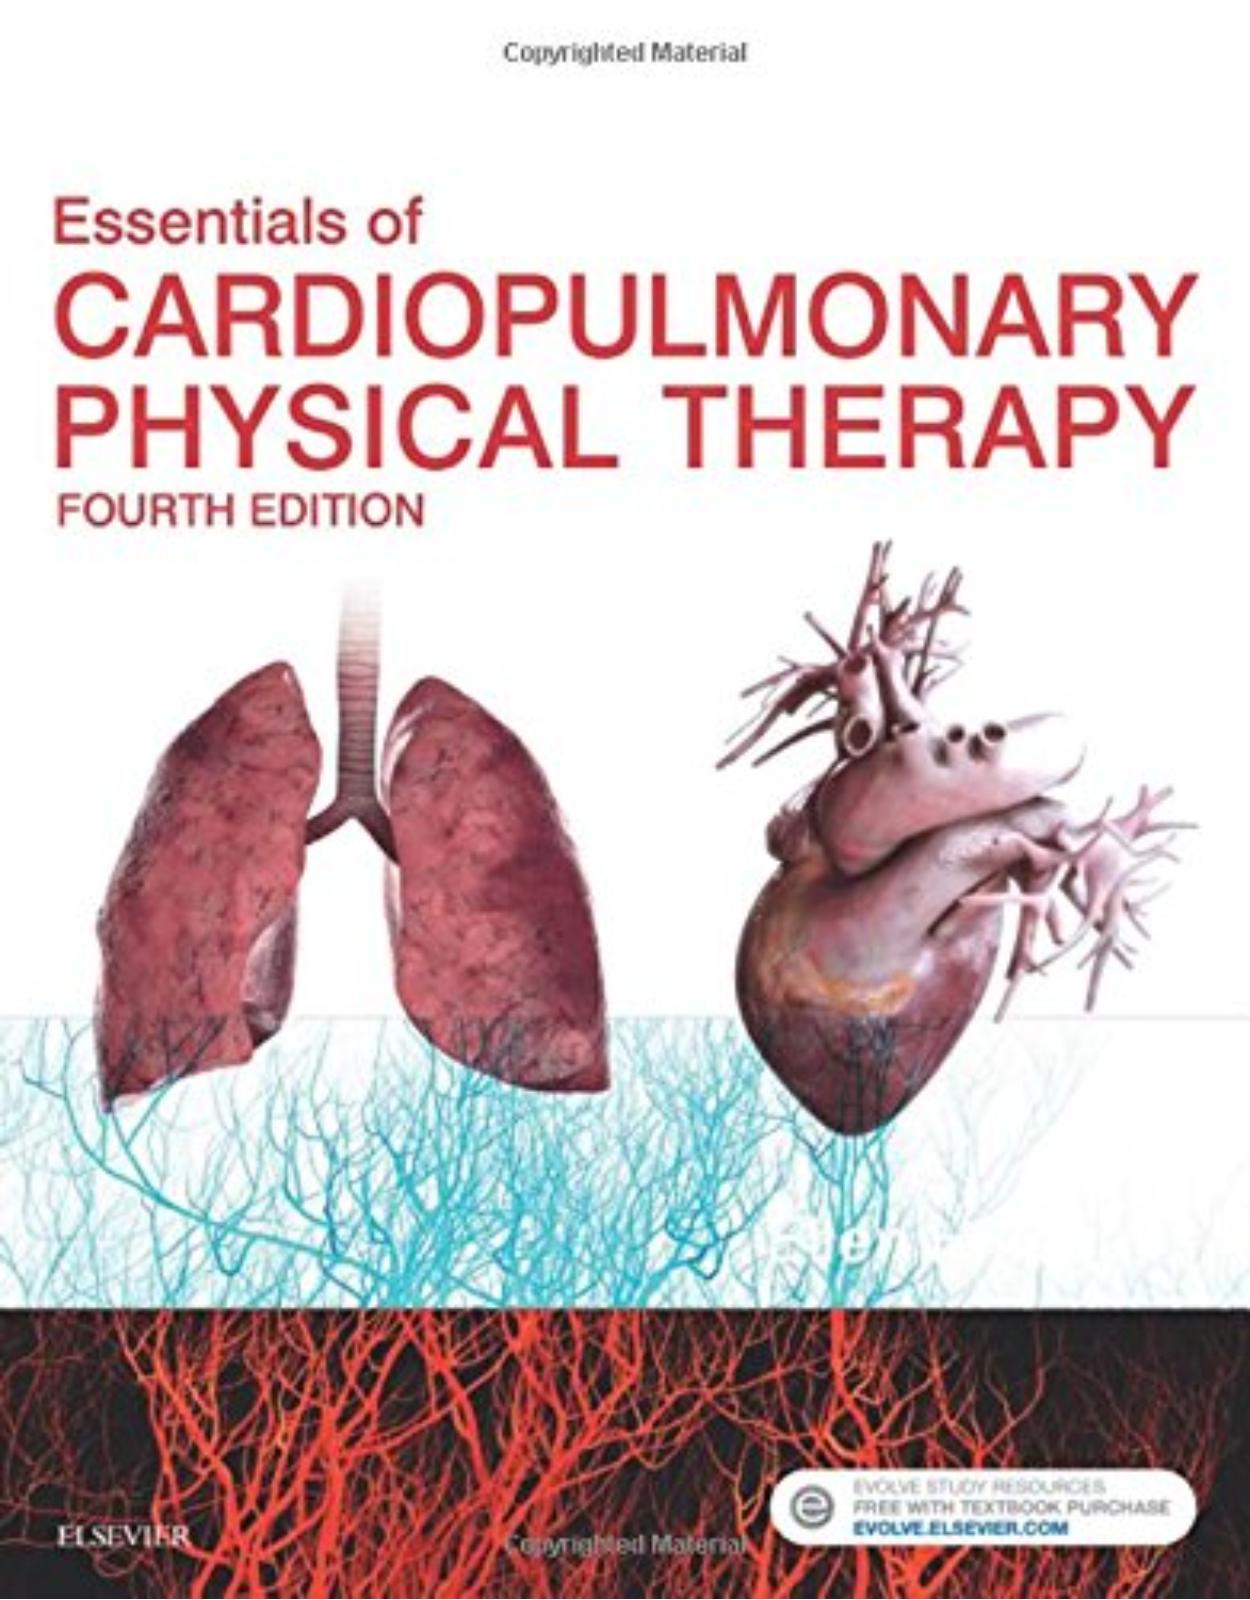 Essentials of Cardiopulmonary Physical Therapy, 4th Edition